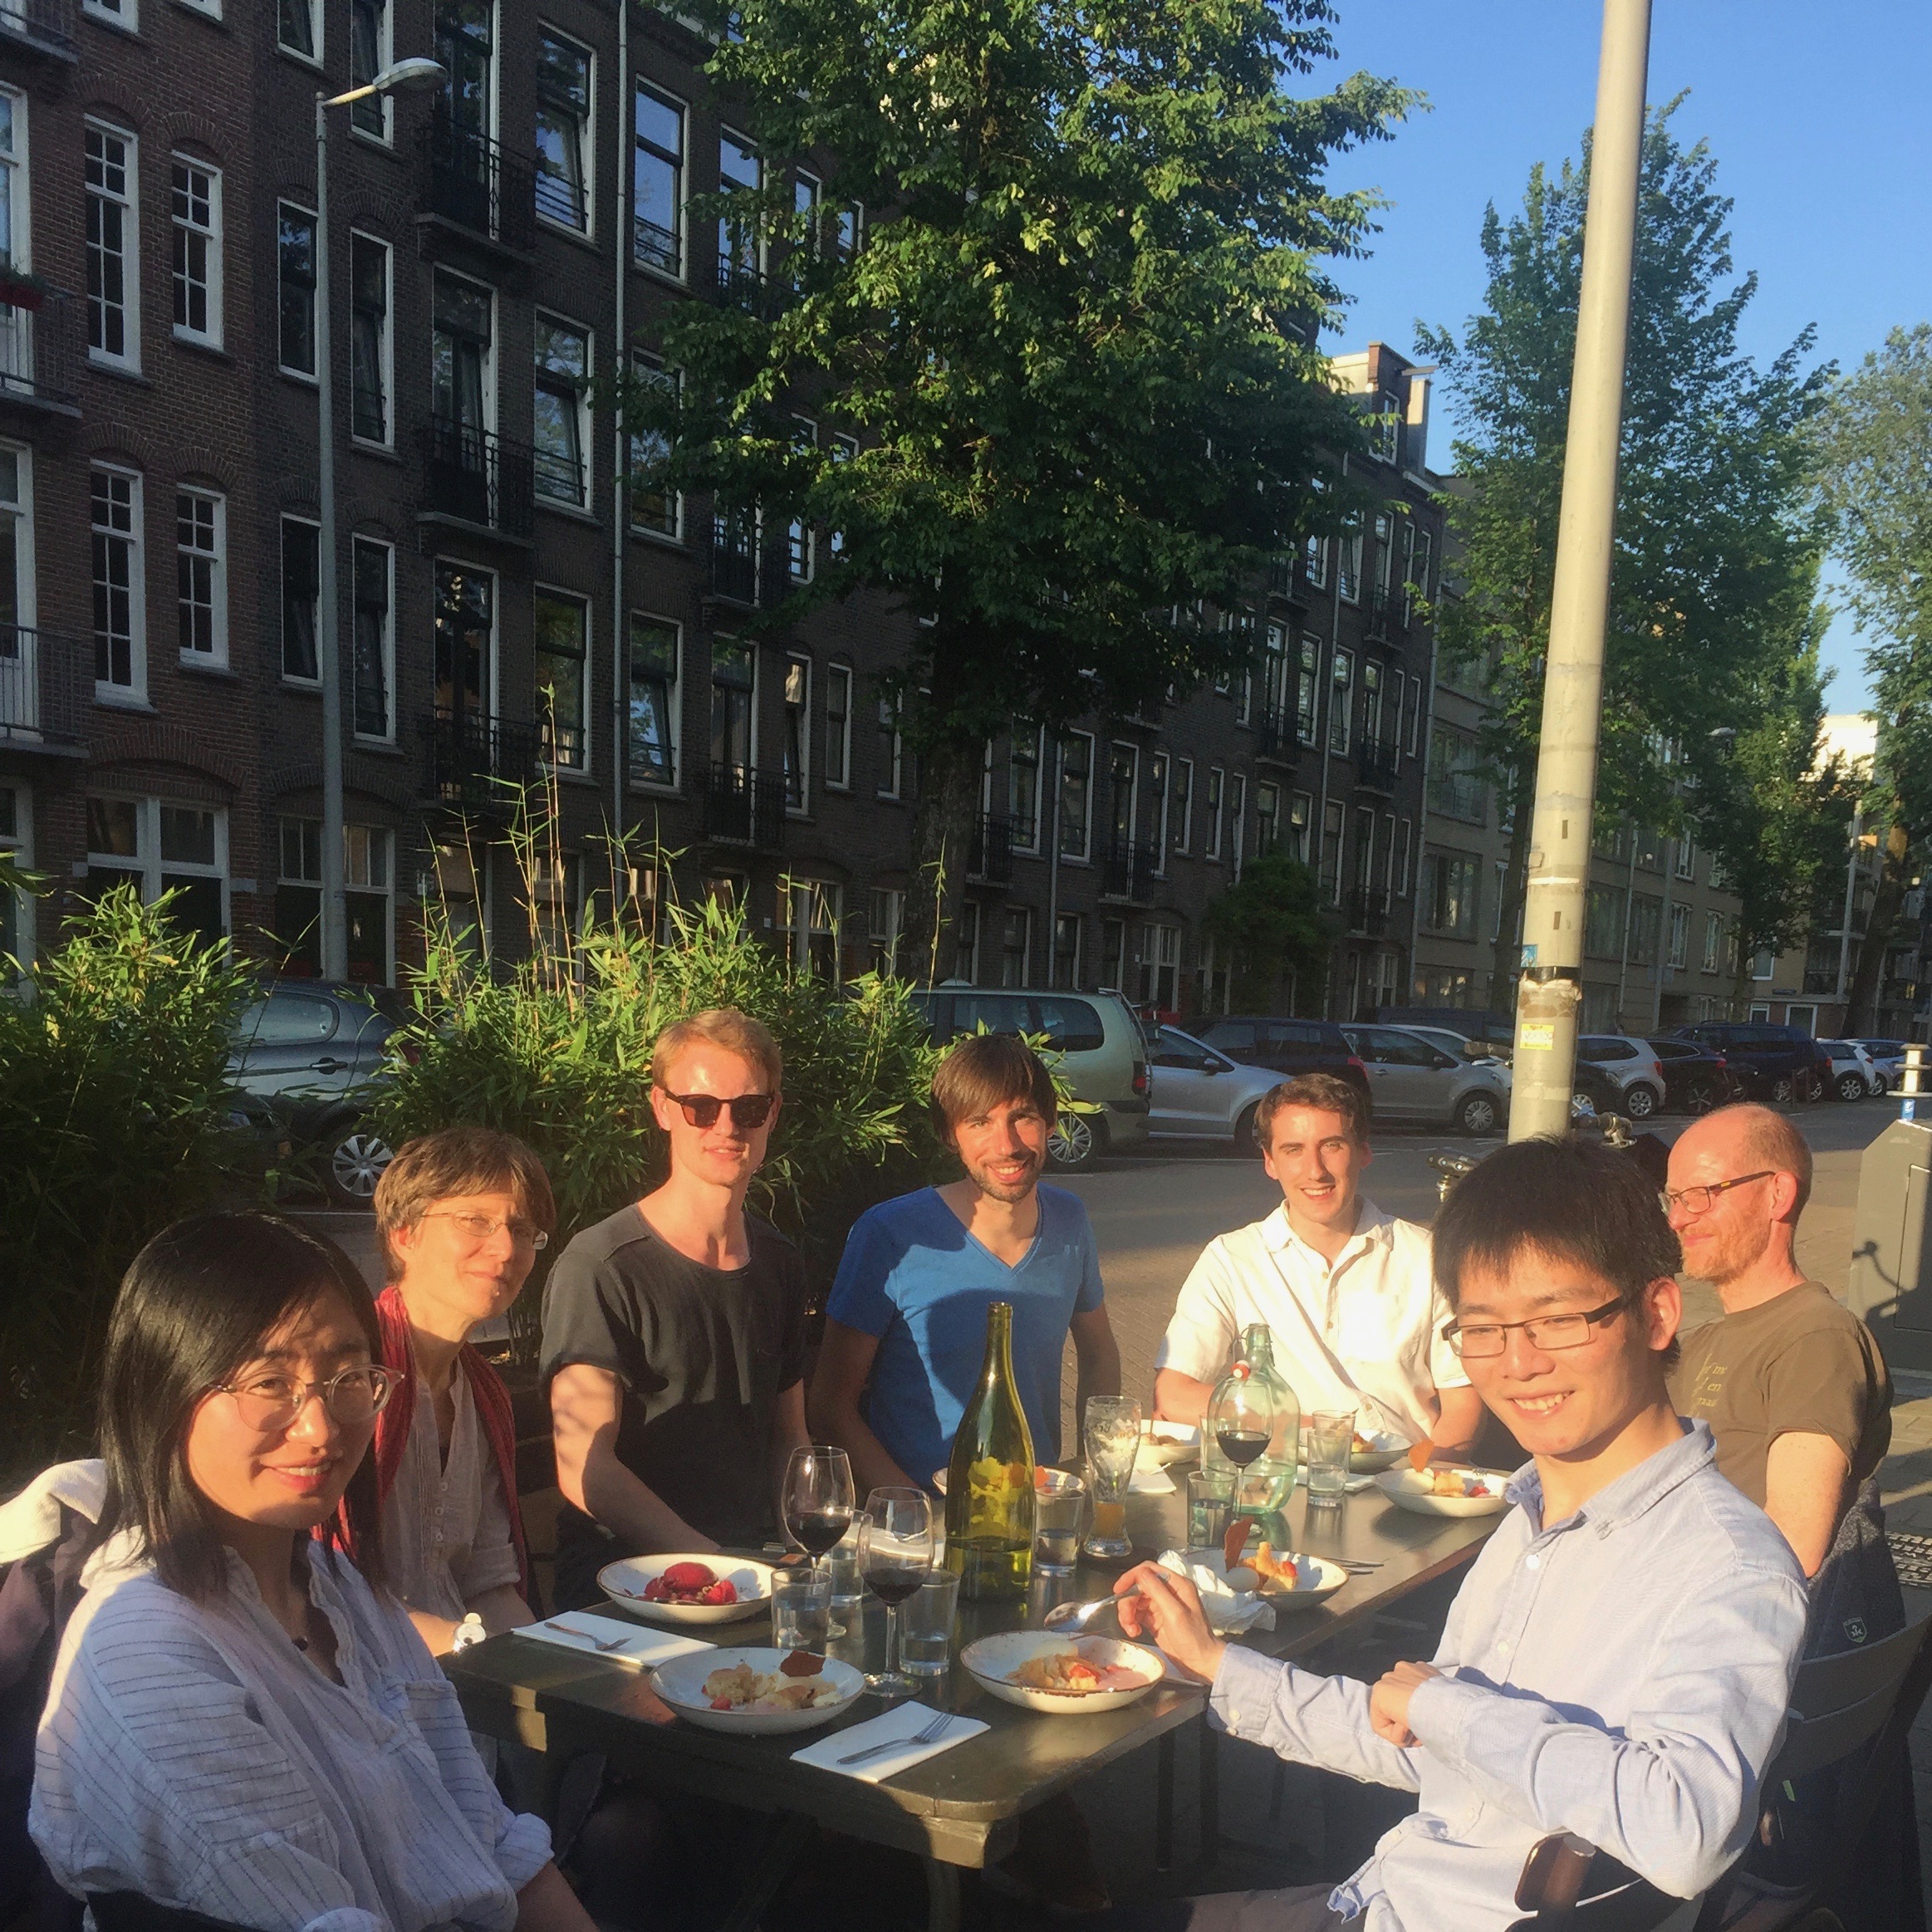 Causal Inference Lab dinner 2019